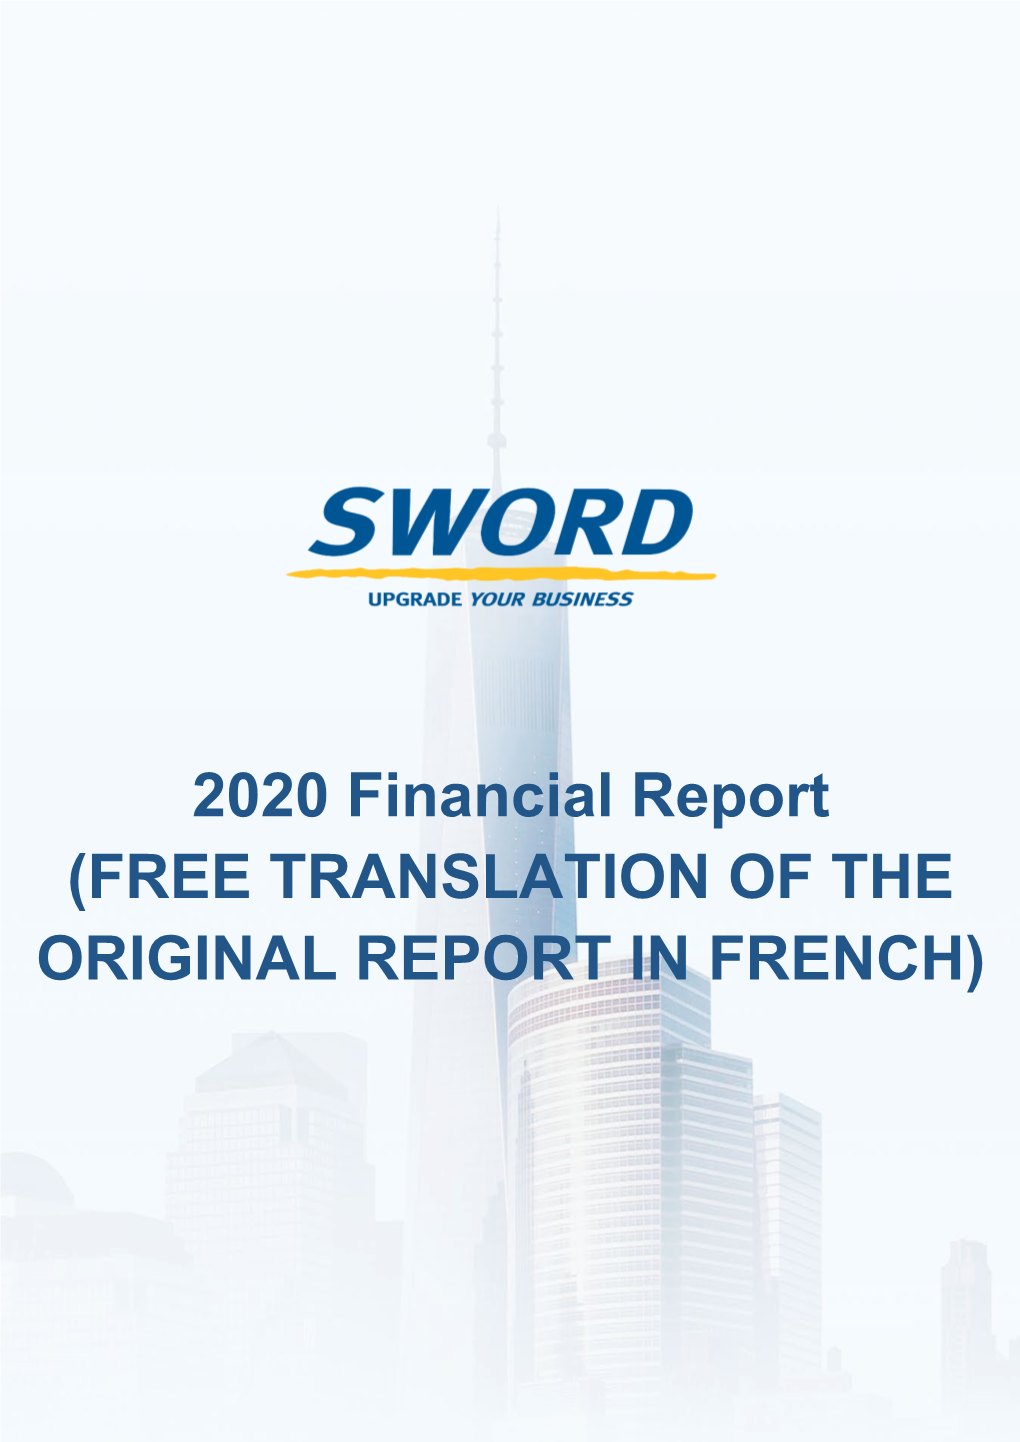 2020 Financial Report (FREE TRANSLATION of the ORIGINAL REPORT in FRENCH)